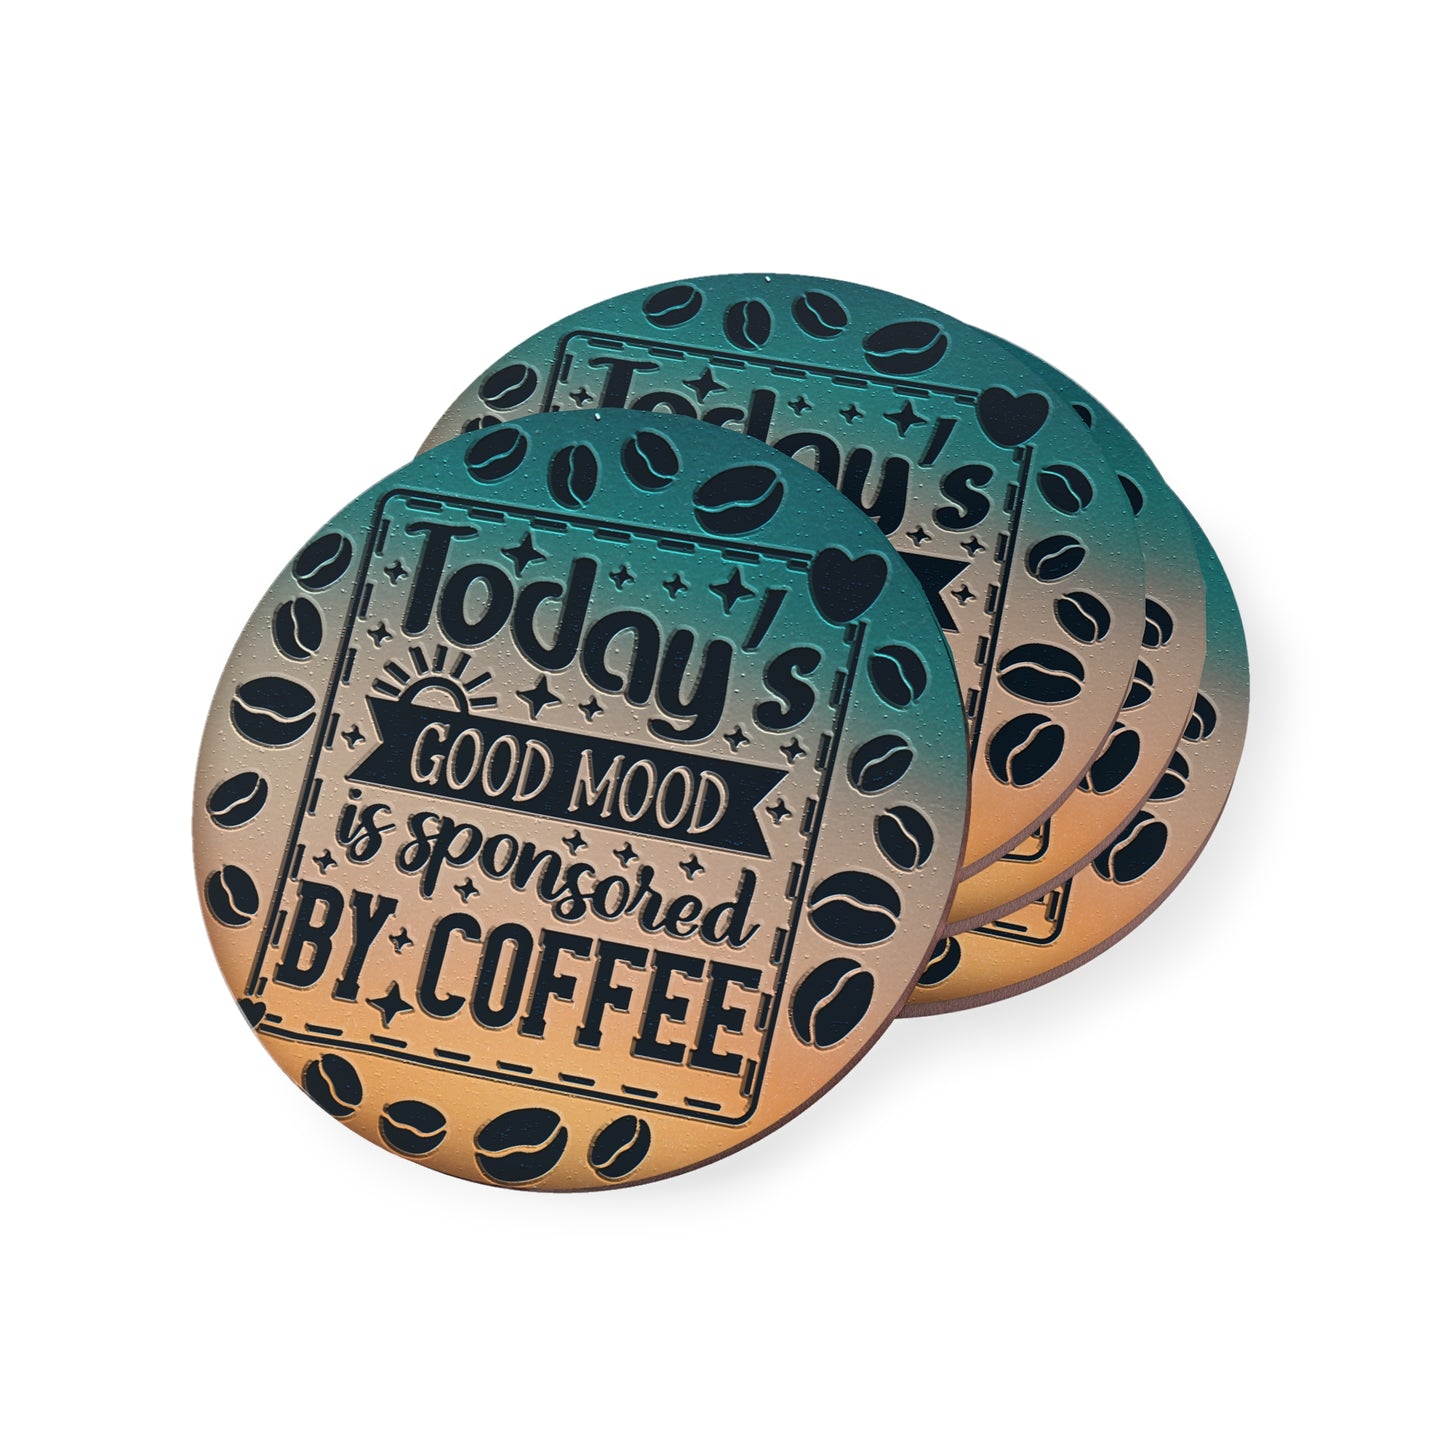 " Today's Good Mood Is Sponsored By Coffee " Round Coasters